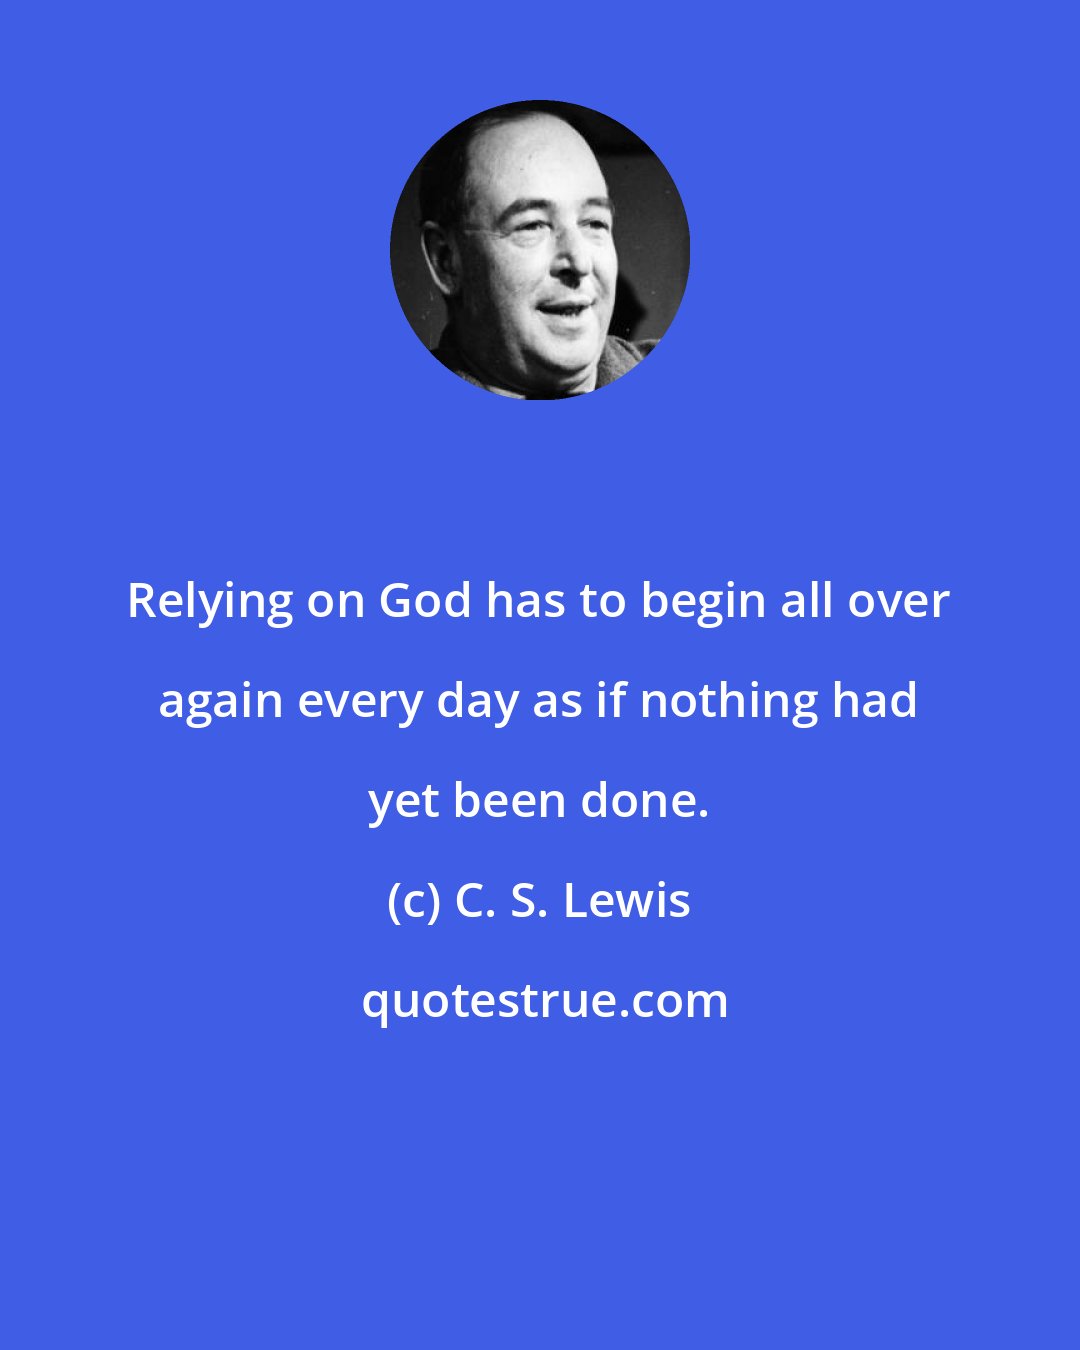 C. S. Lewis: Relying on God has to begin all over again every day as if nothing had yet been done.